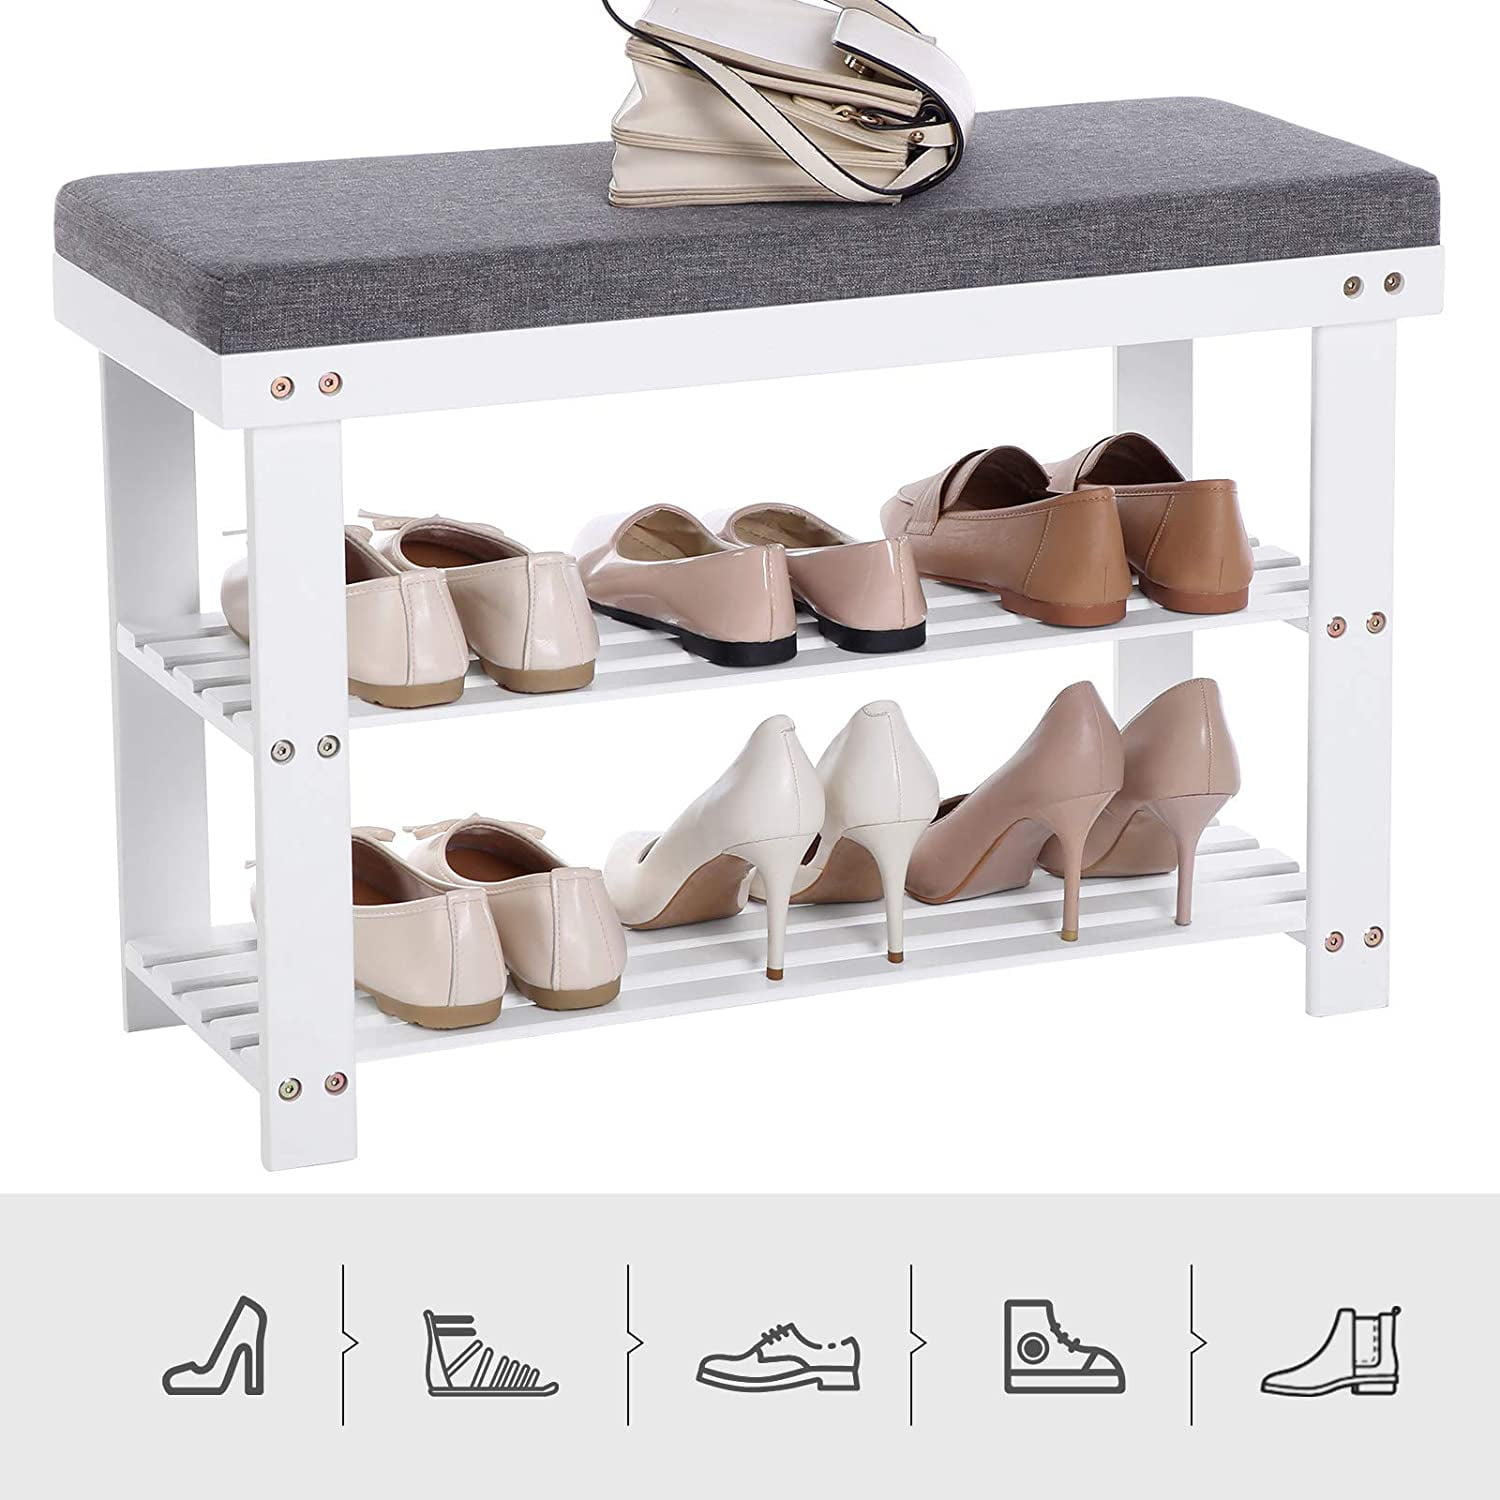 SONGMICS Shoe Rack Bench, 3-Tier Bamboo Shoe Storage Organizer, Entryway  Bench, Holds Up to 286 lb, 11.3 x 27.6 x 17.8 Inches, for Entryway Bathroom